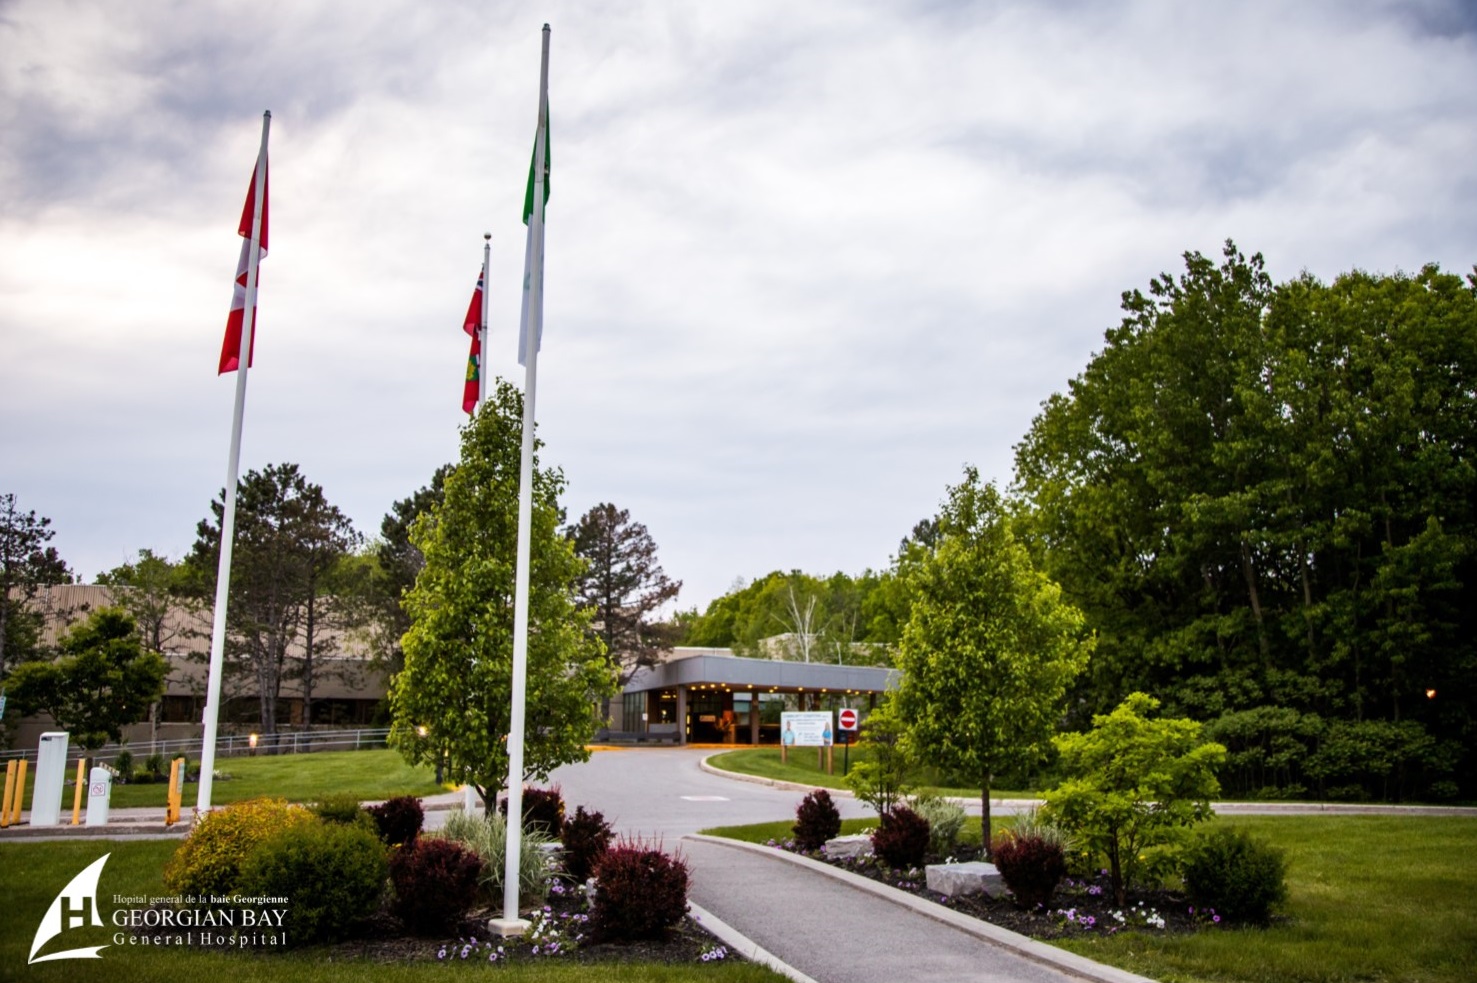 The main entrance of the hospital showing the walkway, 2 flag posts, and a nice garden with green trees and plants in bloom.